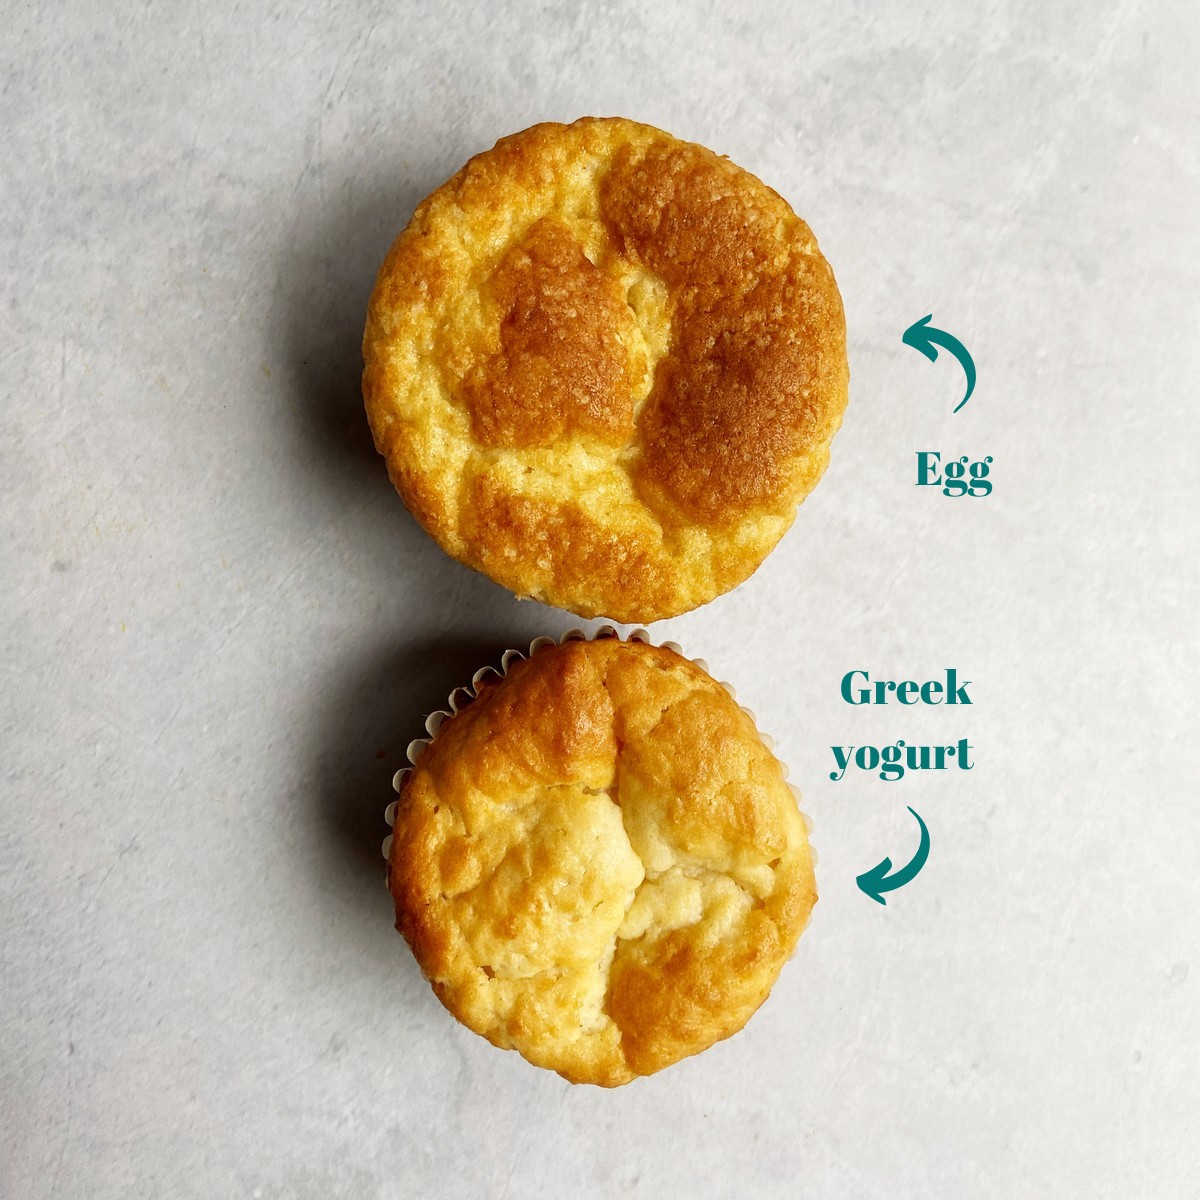 A muffin made with egg and another made with Greek yogurt.